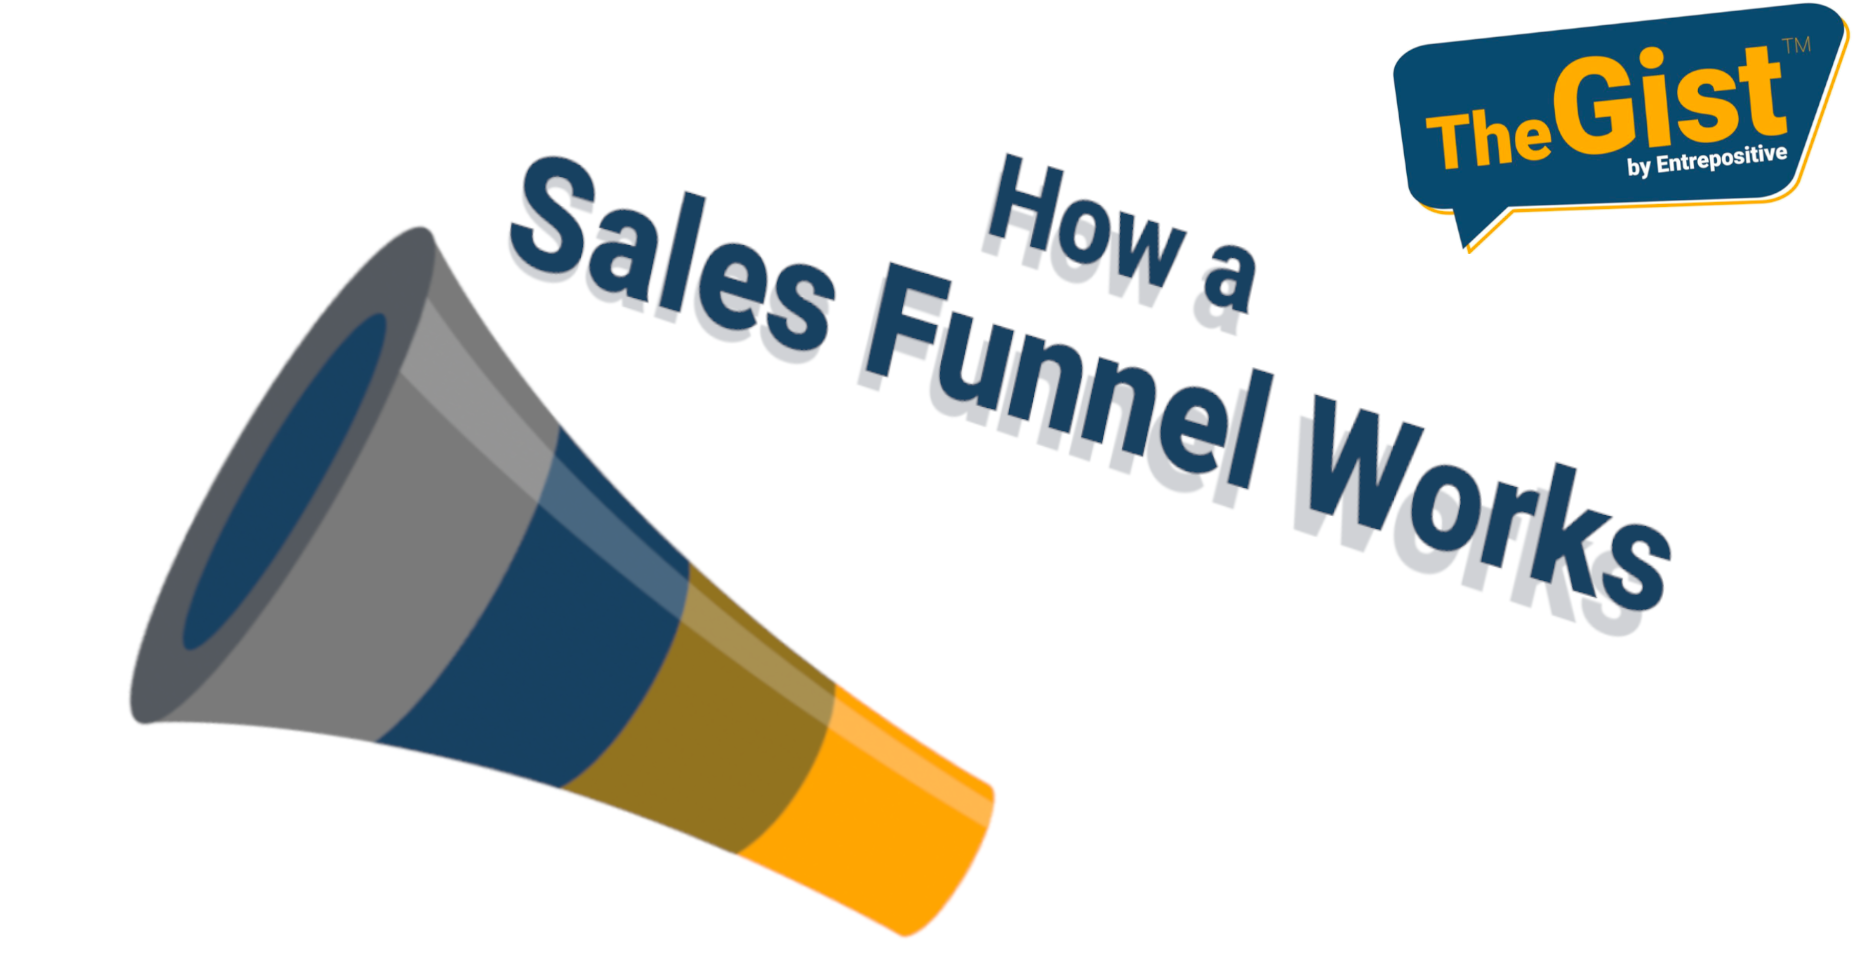 How a Sales Funnel Works, The Gist™ by Entrepositive